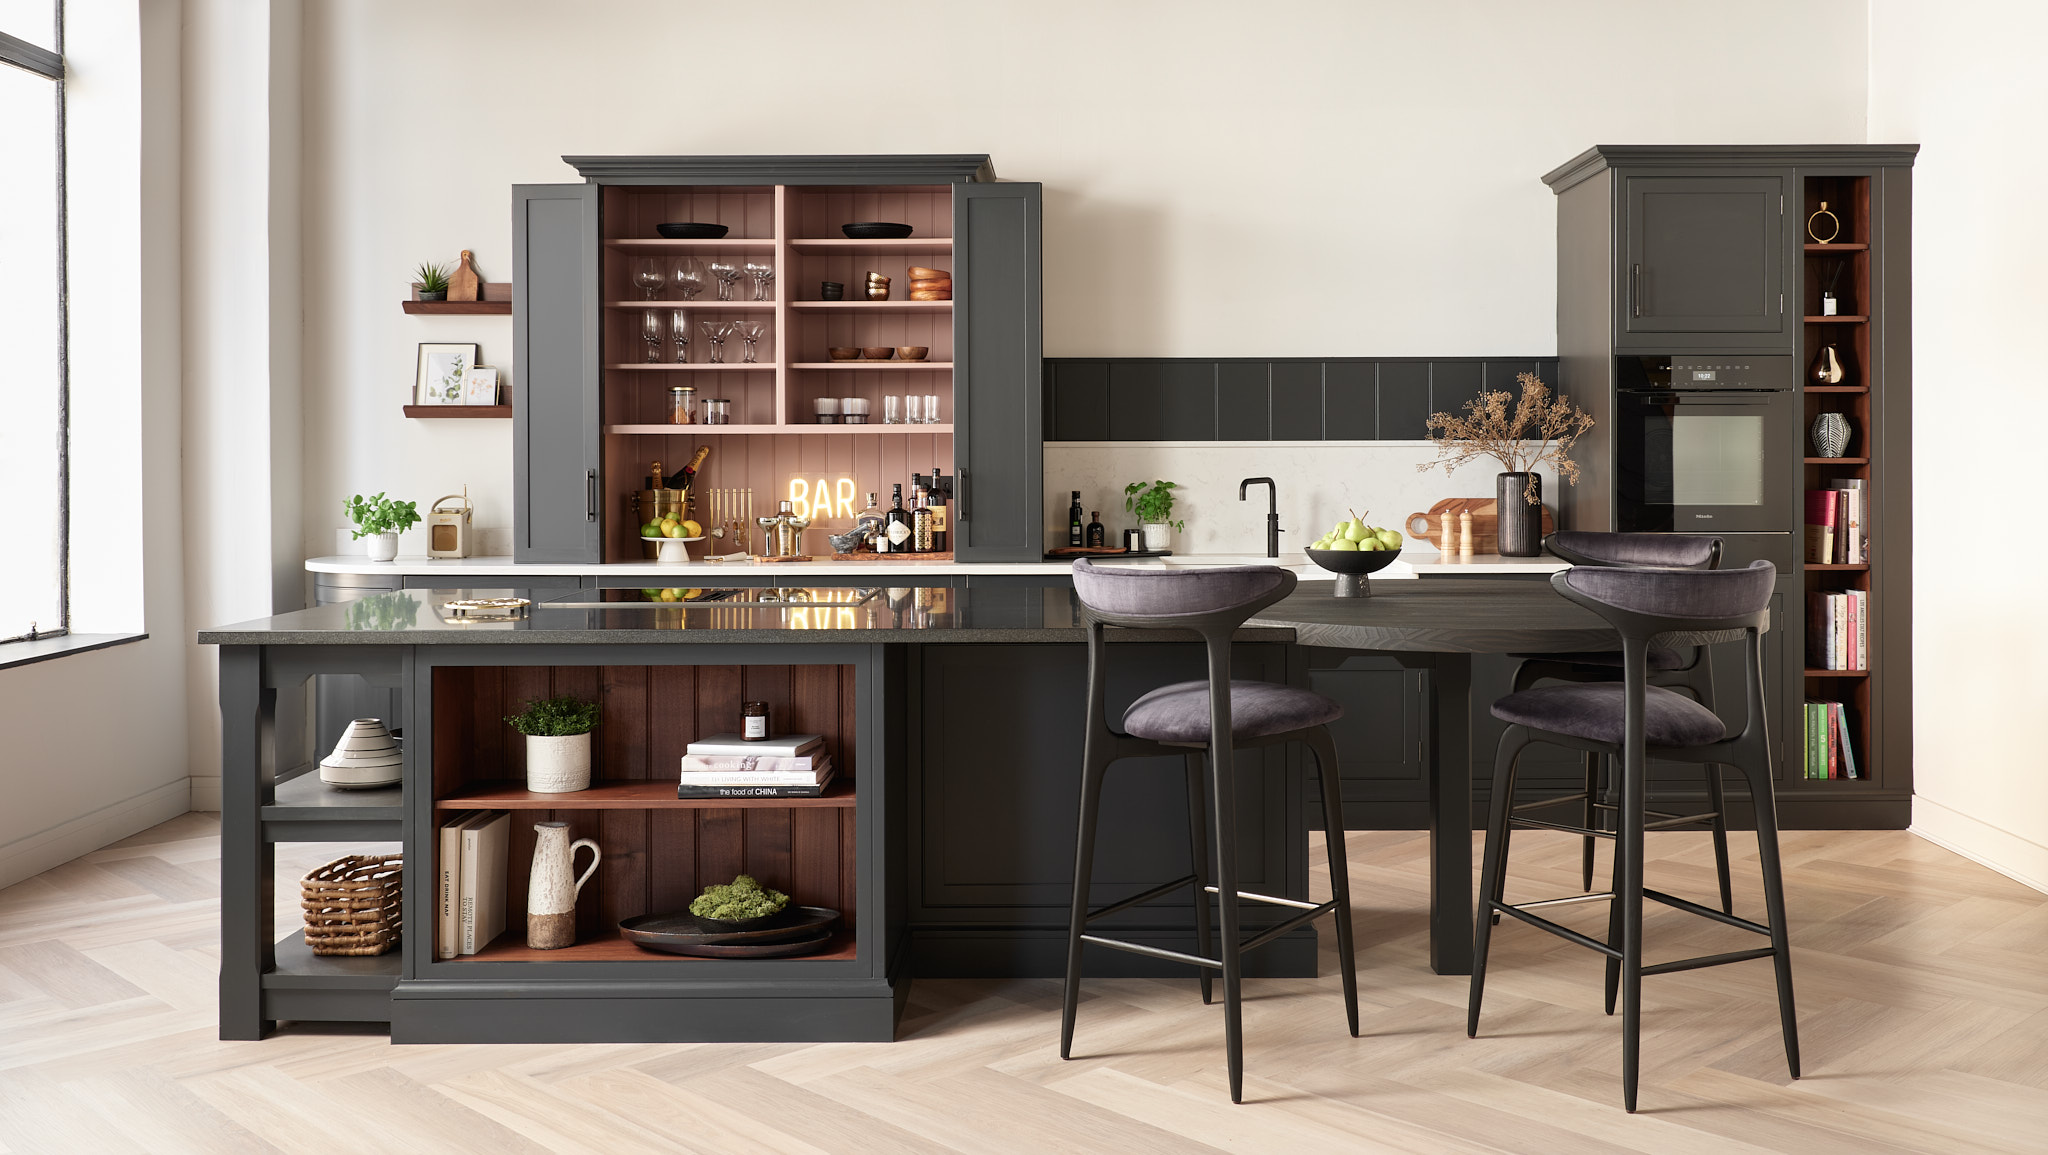 glamourous black-on-black Arbor kitchen for leading interiors brand, Lee Longlands